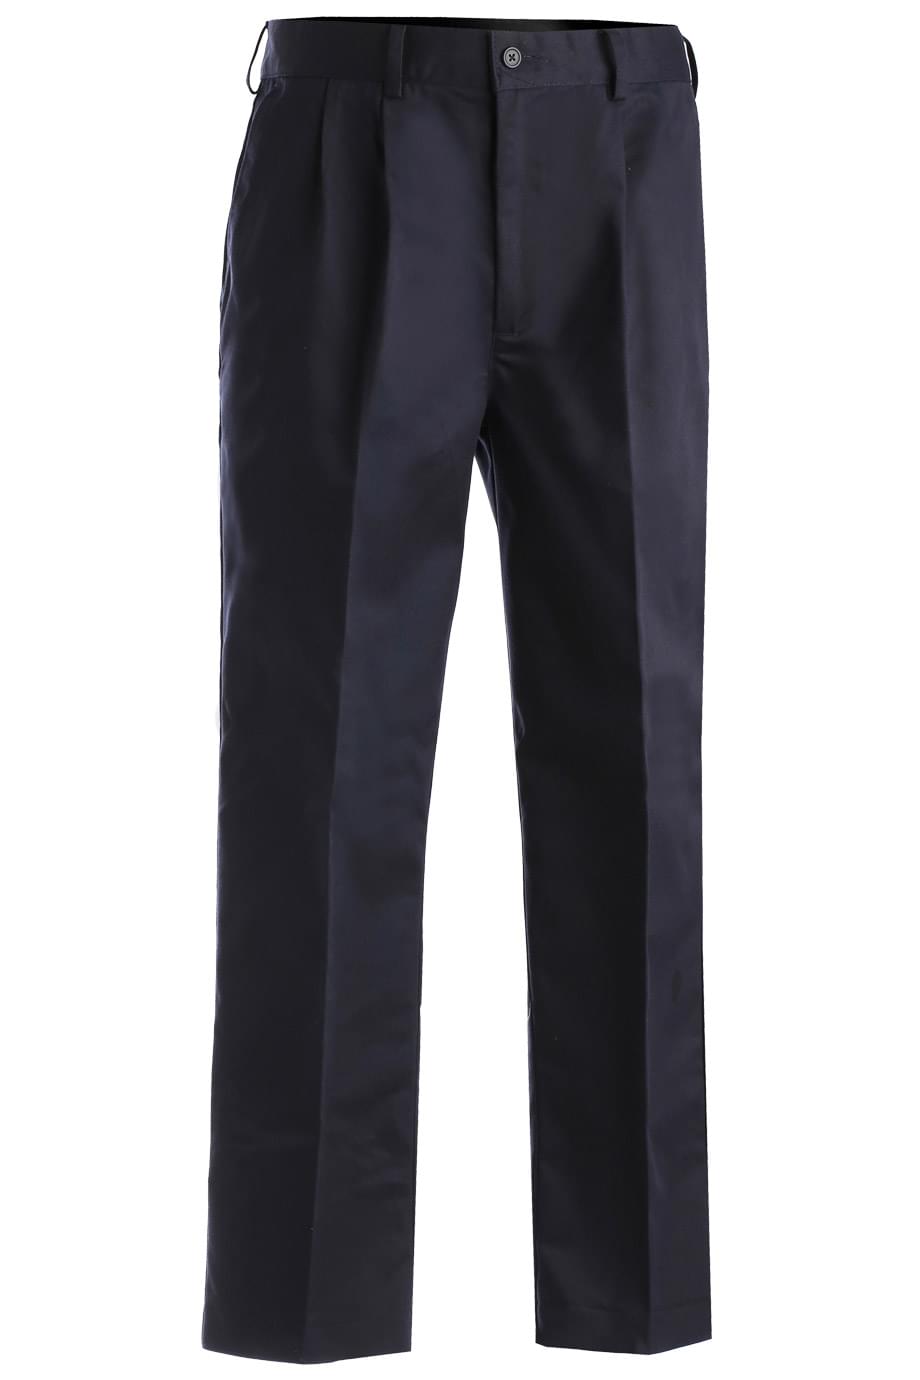 54 Edwards Mens Business Casual Pleated Pant Black 